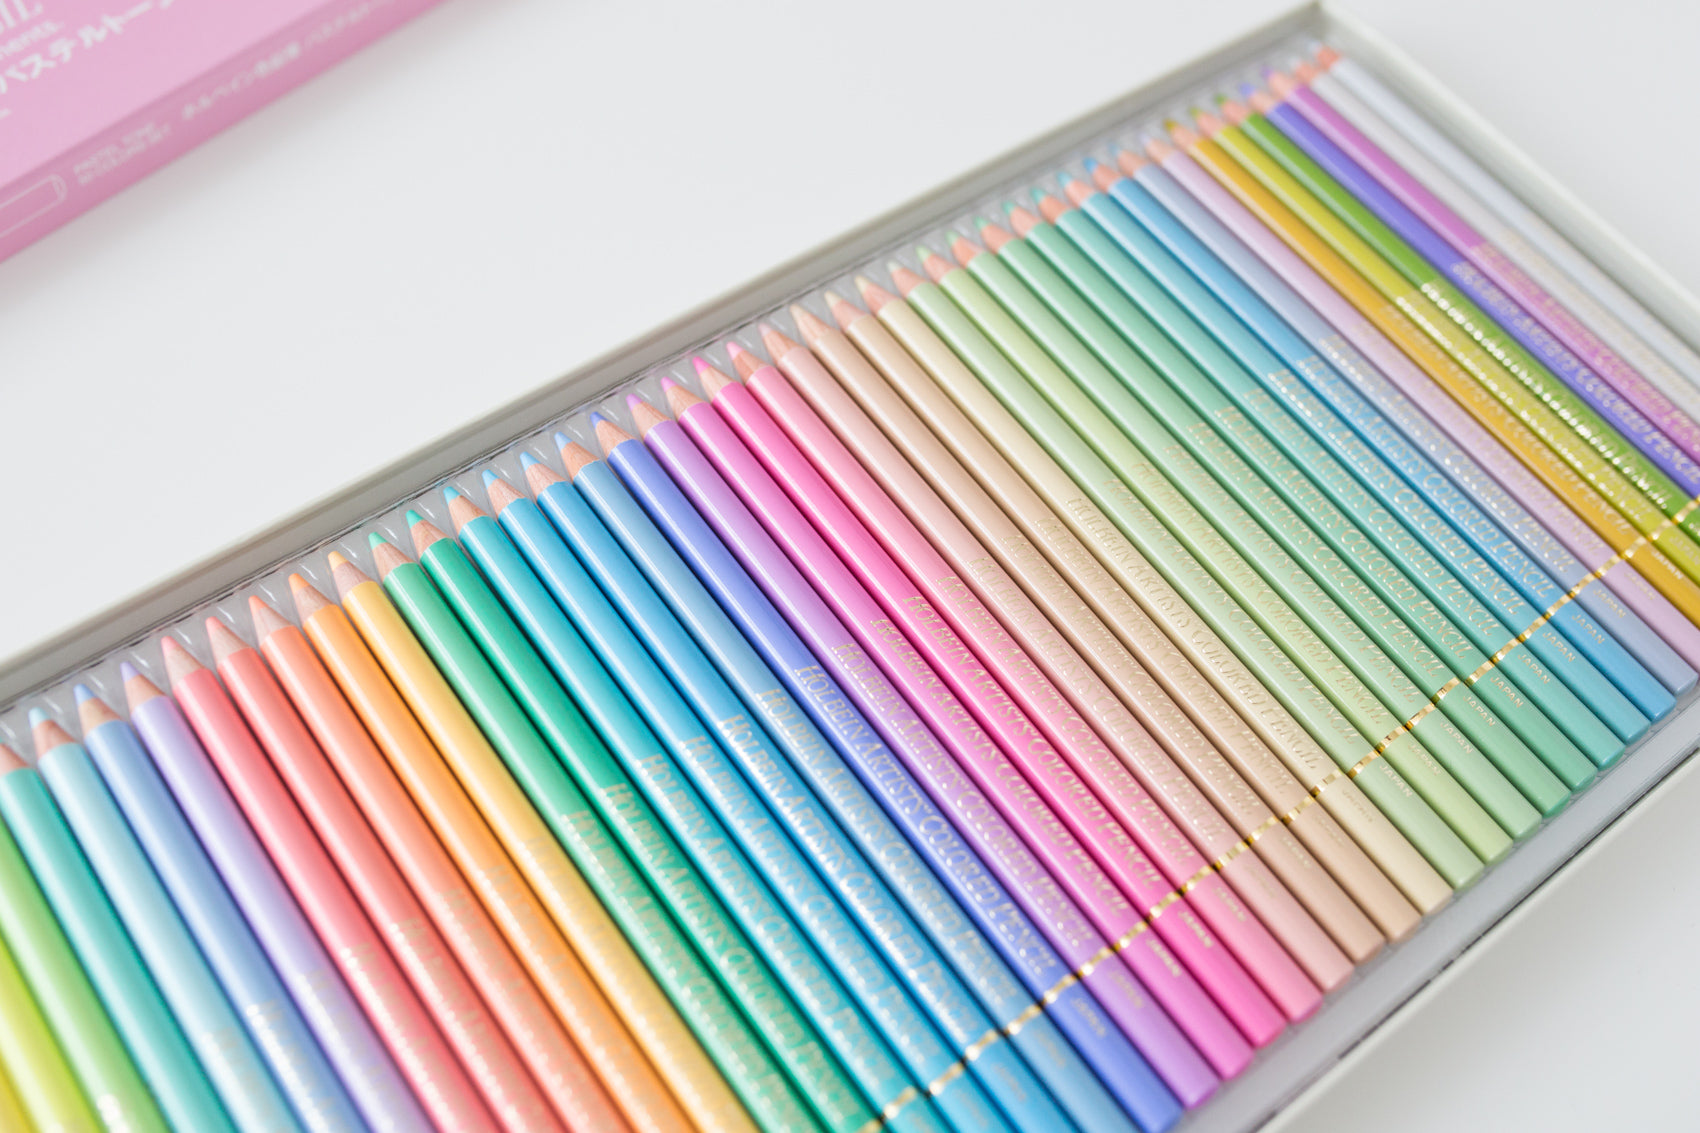  Holbein Coloring Pencils Pastel set 50